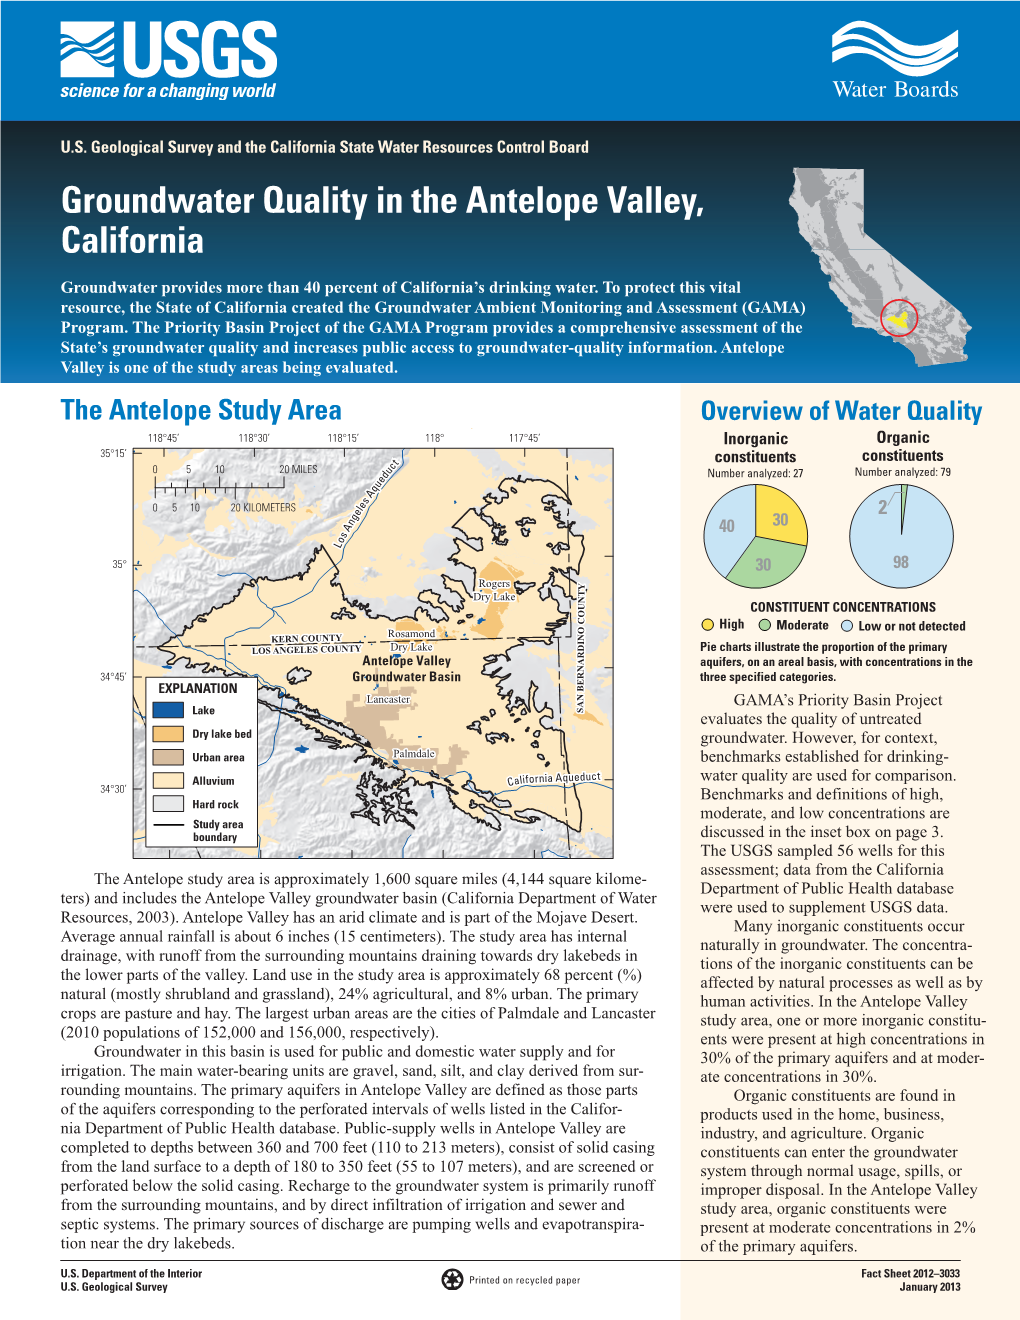 Groundwater Quality in the Antelope Valley, California